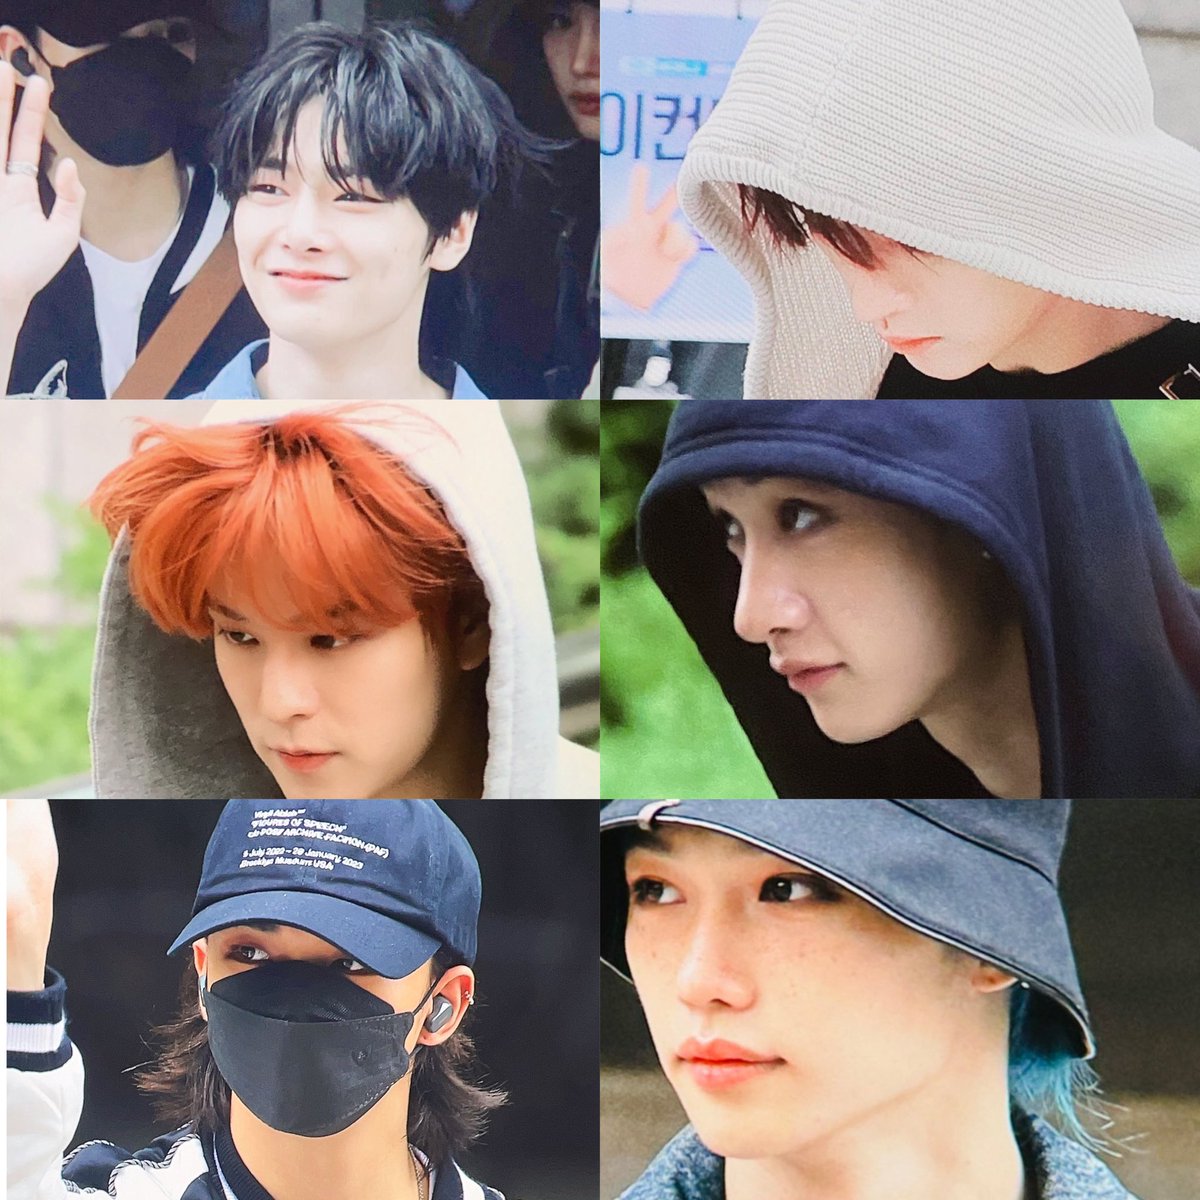 So the colours are similar to GoLive:
Minho orange -> now Seungmin
Seungmin purple/red -> now Minho
Felix silver-grey -> now Jisung

Then we have Felix blue again and Chan, Changbin, Jeongin and Hyunjin black again.
No one blonde this time.